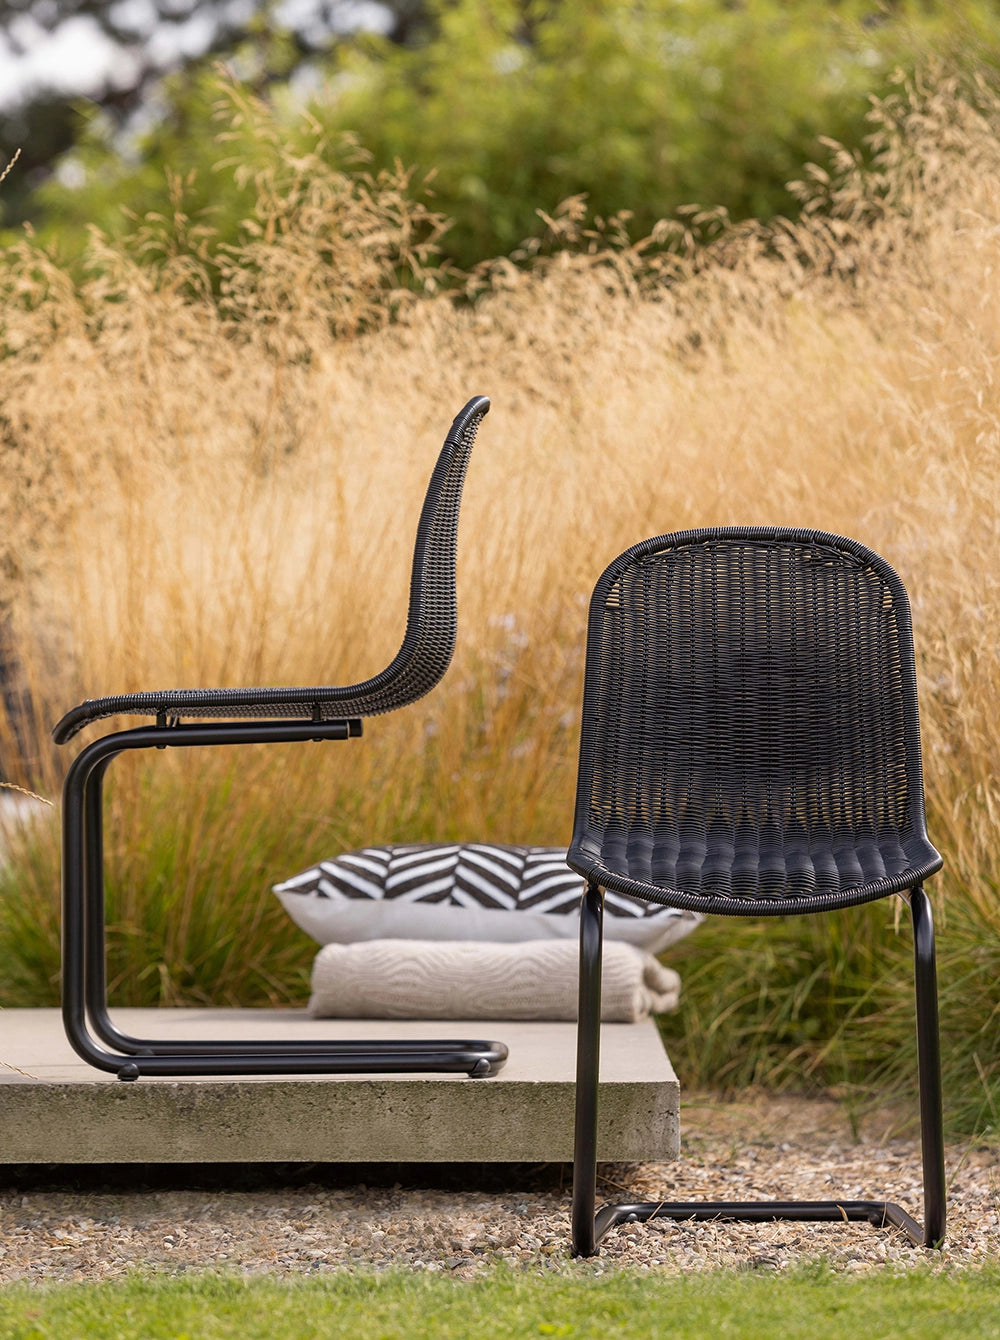 Elm Dining Chair - Black 8 with Concrete Platform and Printed Pillow in Outdoor Setting